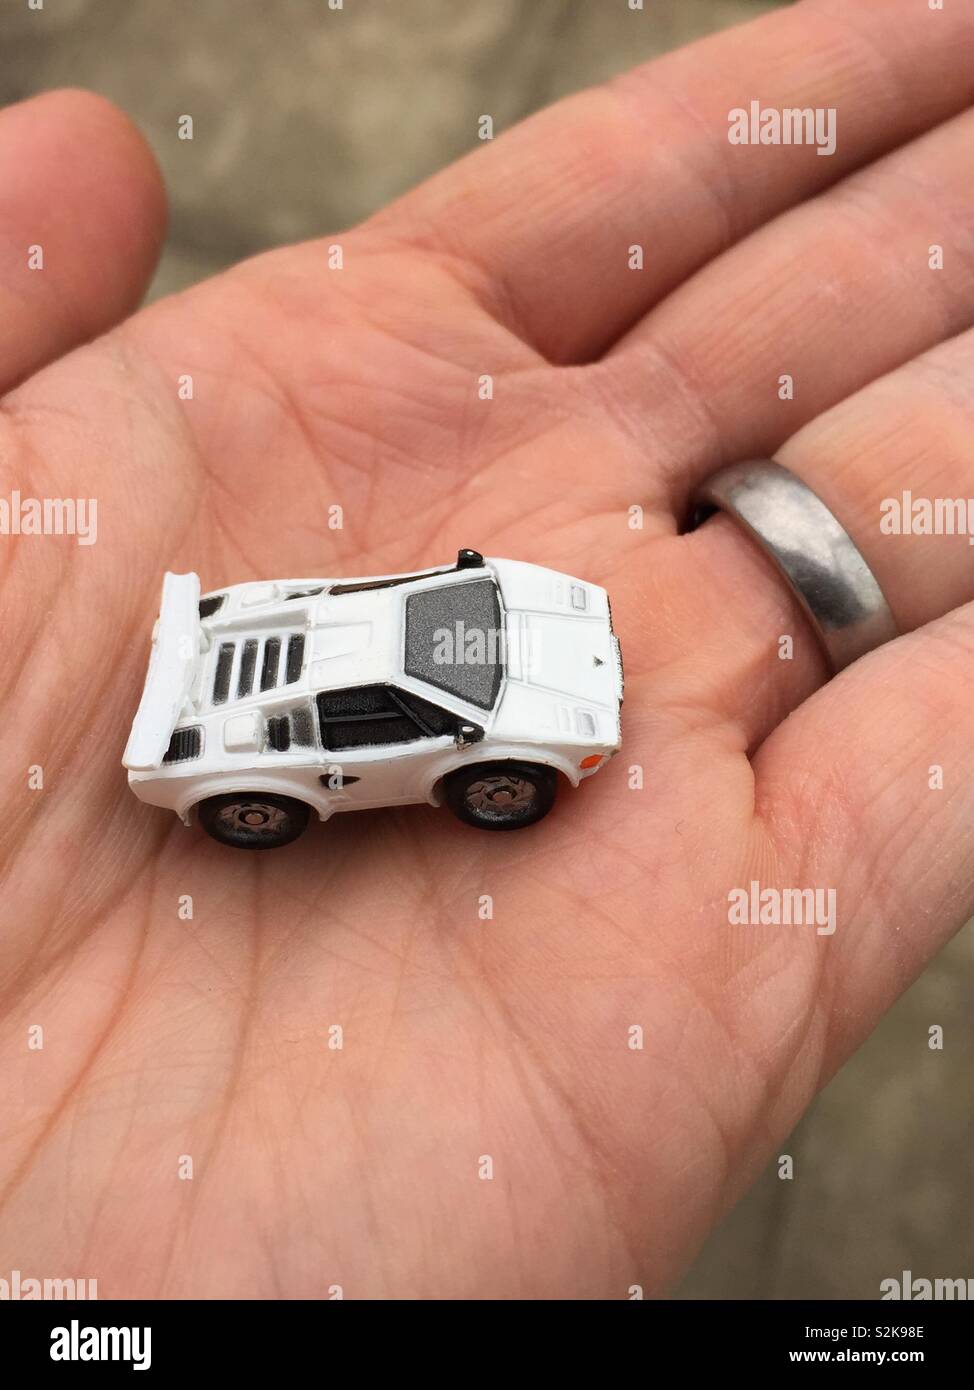 Miniature Lamborghini toy car in the palm of a hand. World in your palm,  holding a dream and metaphor for wealth or riches? Hot wheels Stock Photo -  Alamy